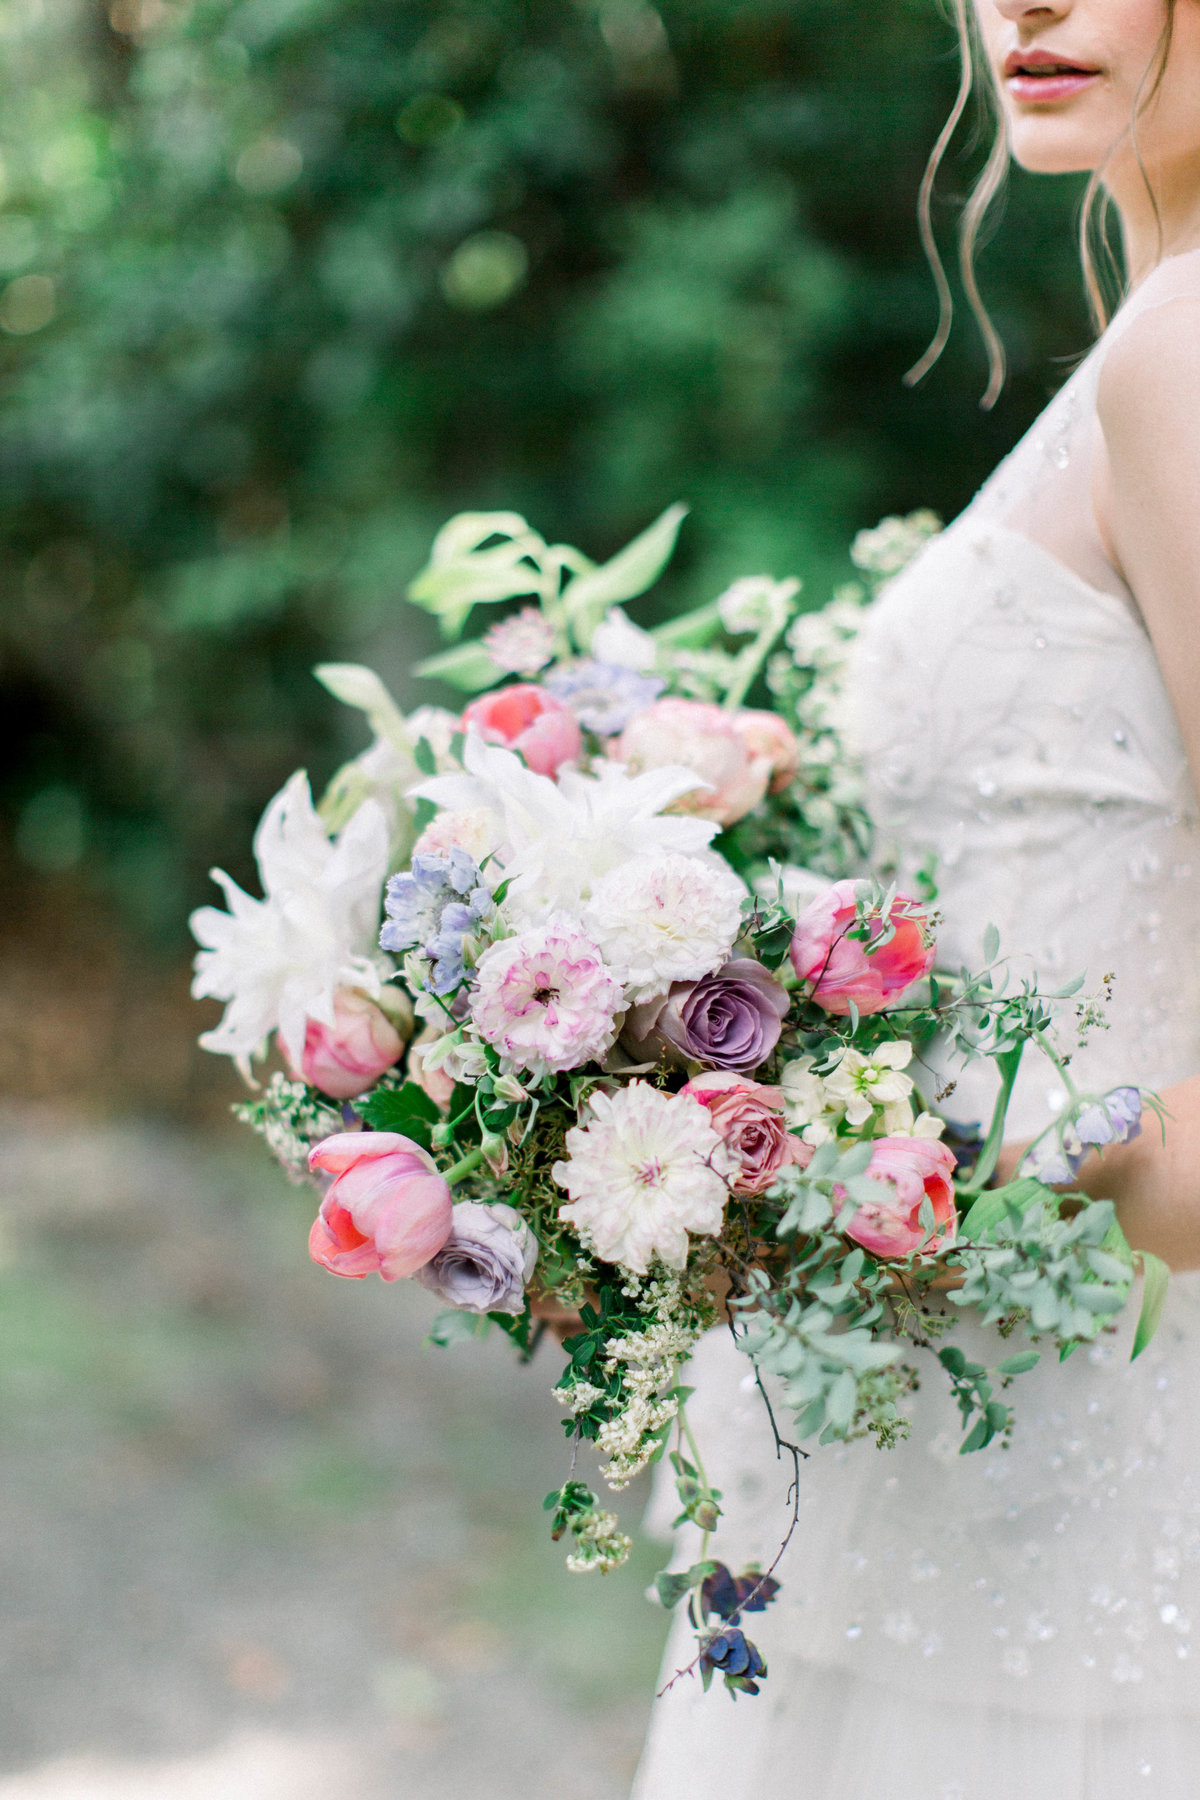 Gradient and Hue designs southern spring bouquet for Charleston garden wedding at Magnolia Plantation